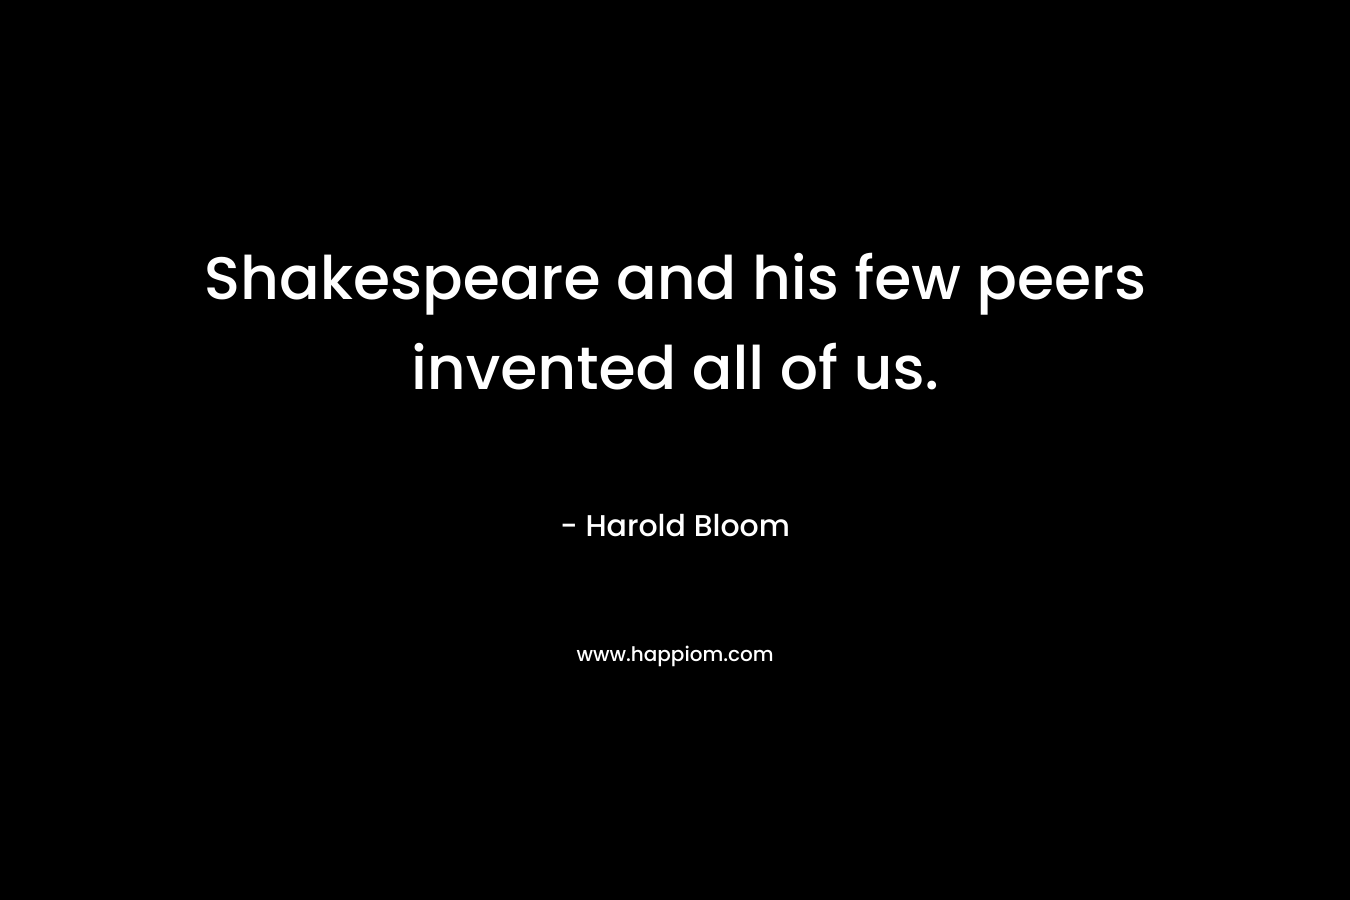 Shakespeare and his few peers invented all of us. – Harold Bloom